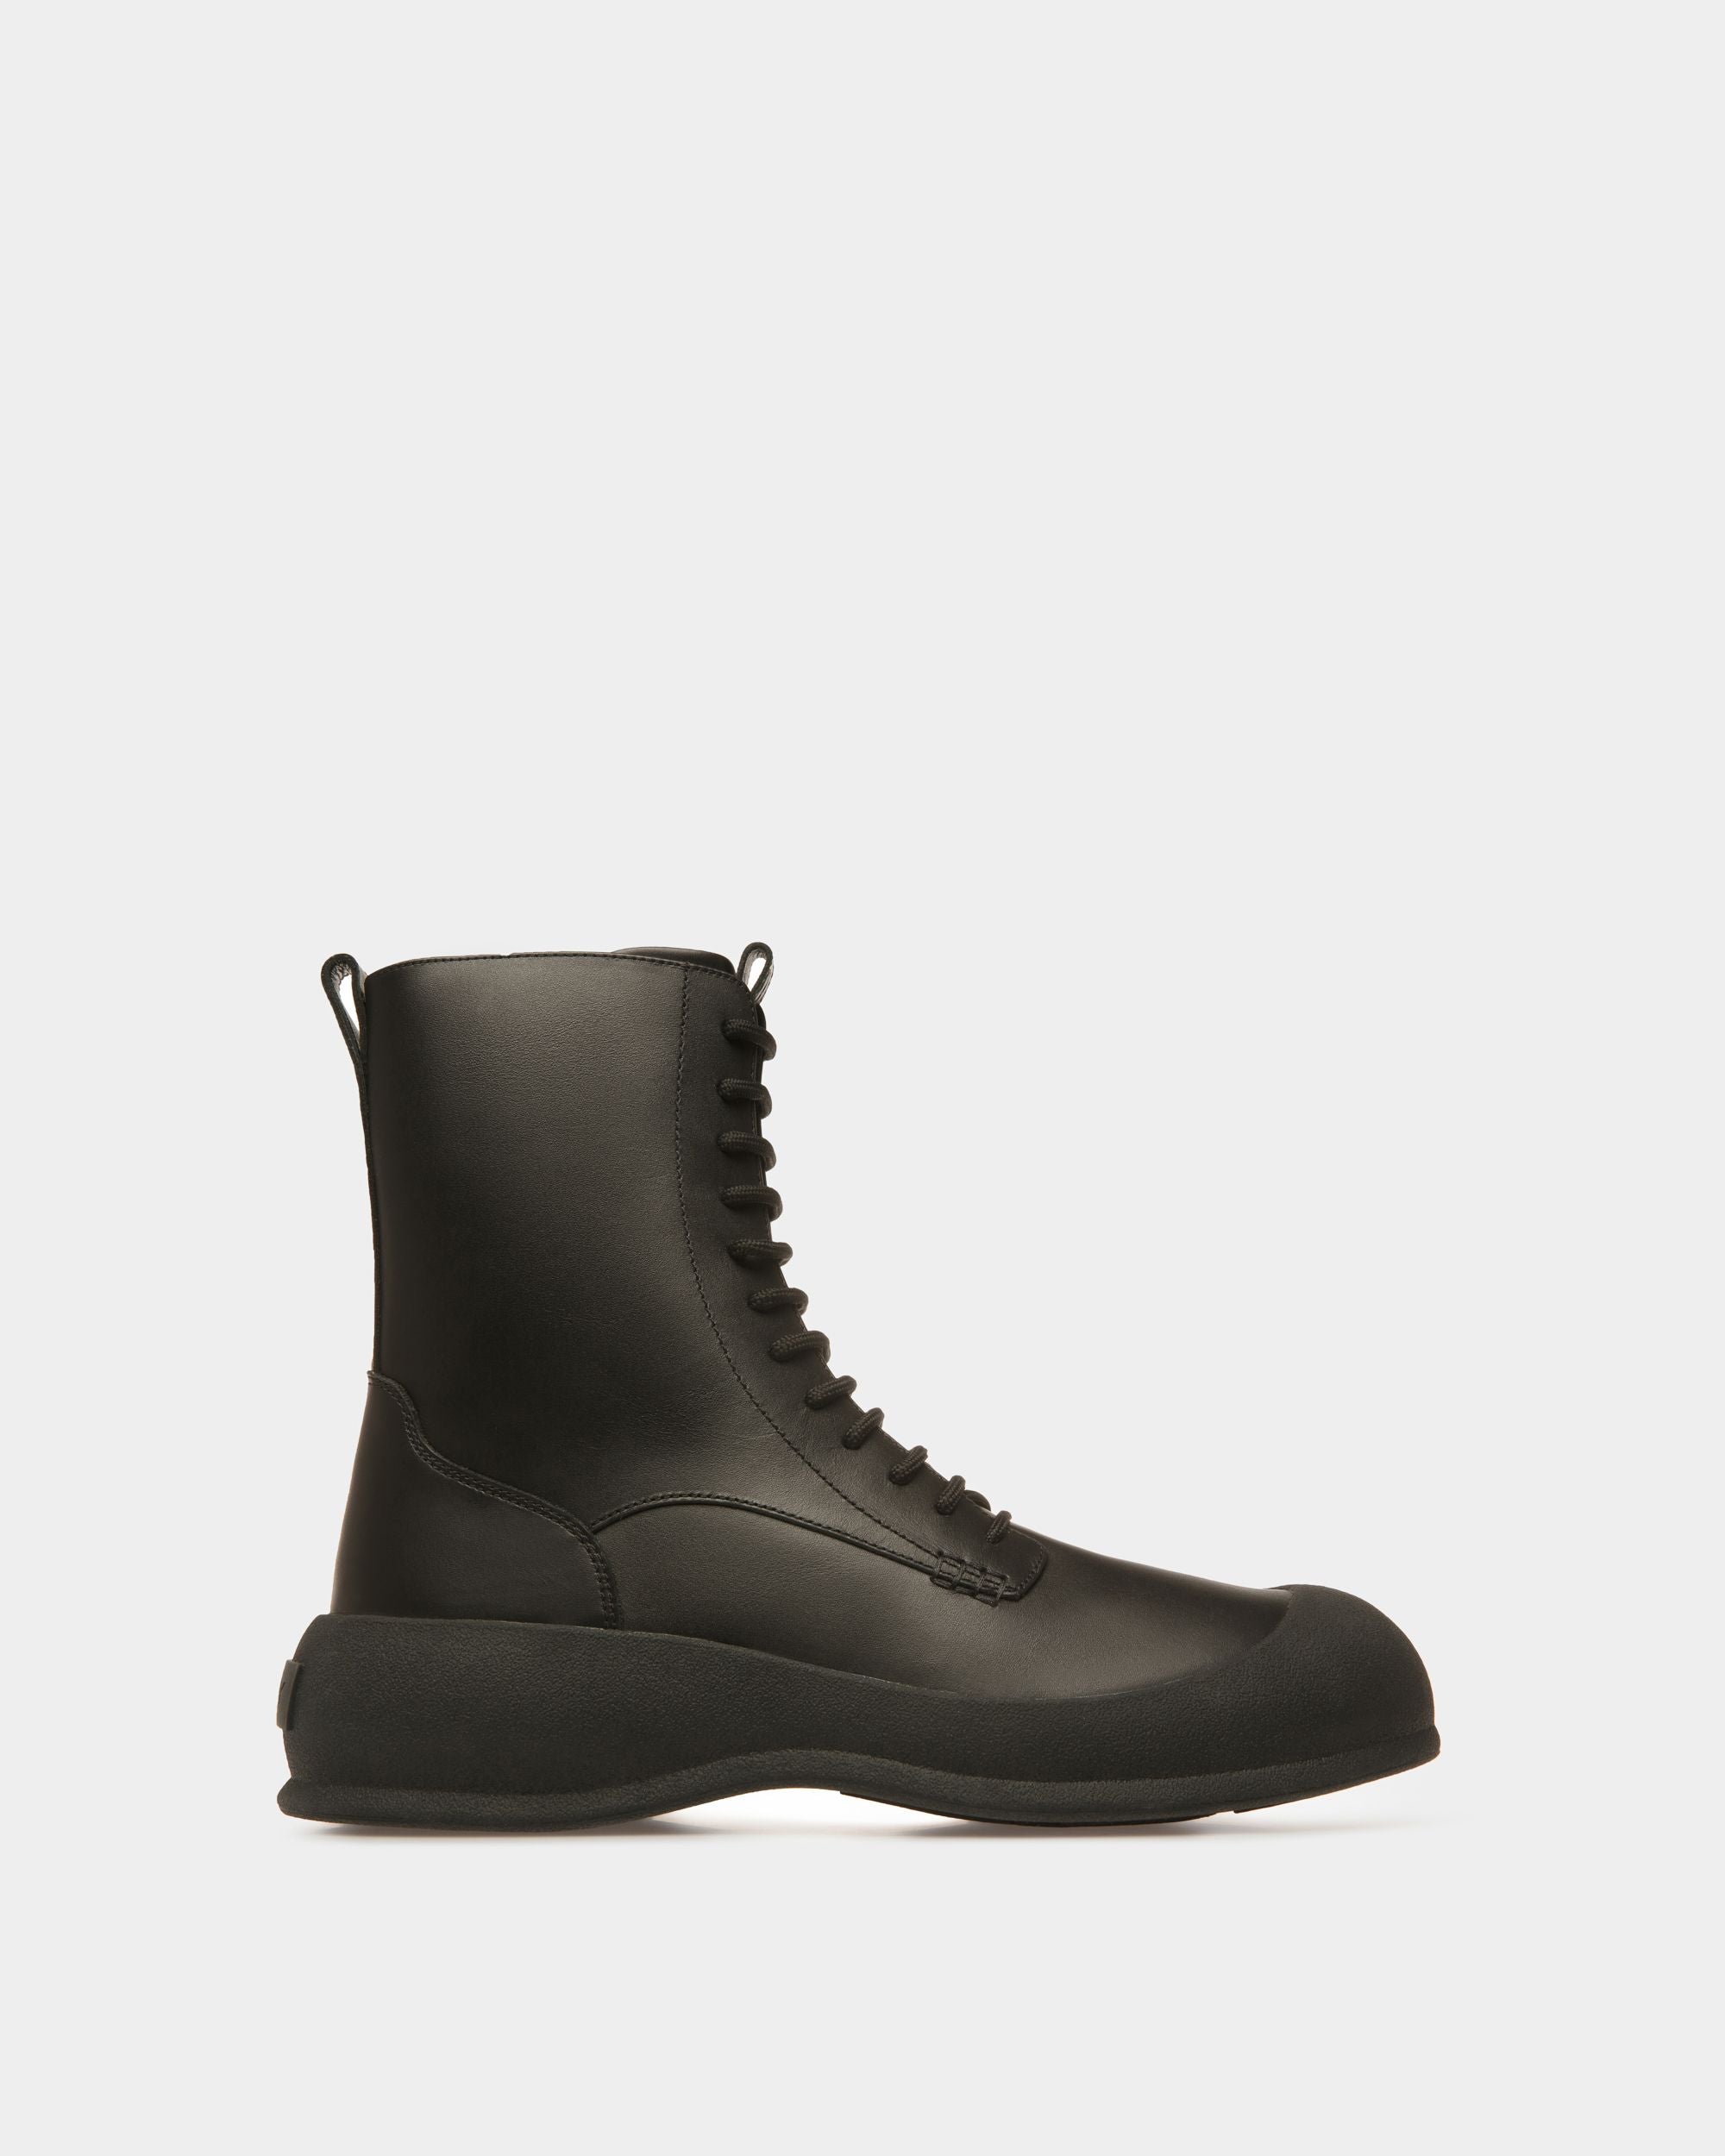 Celsyo | Men's Boots | Black Leather | Bally | Still Life Side